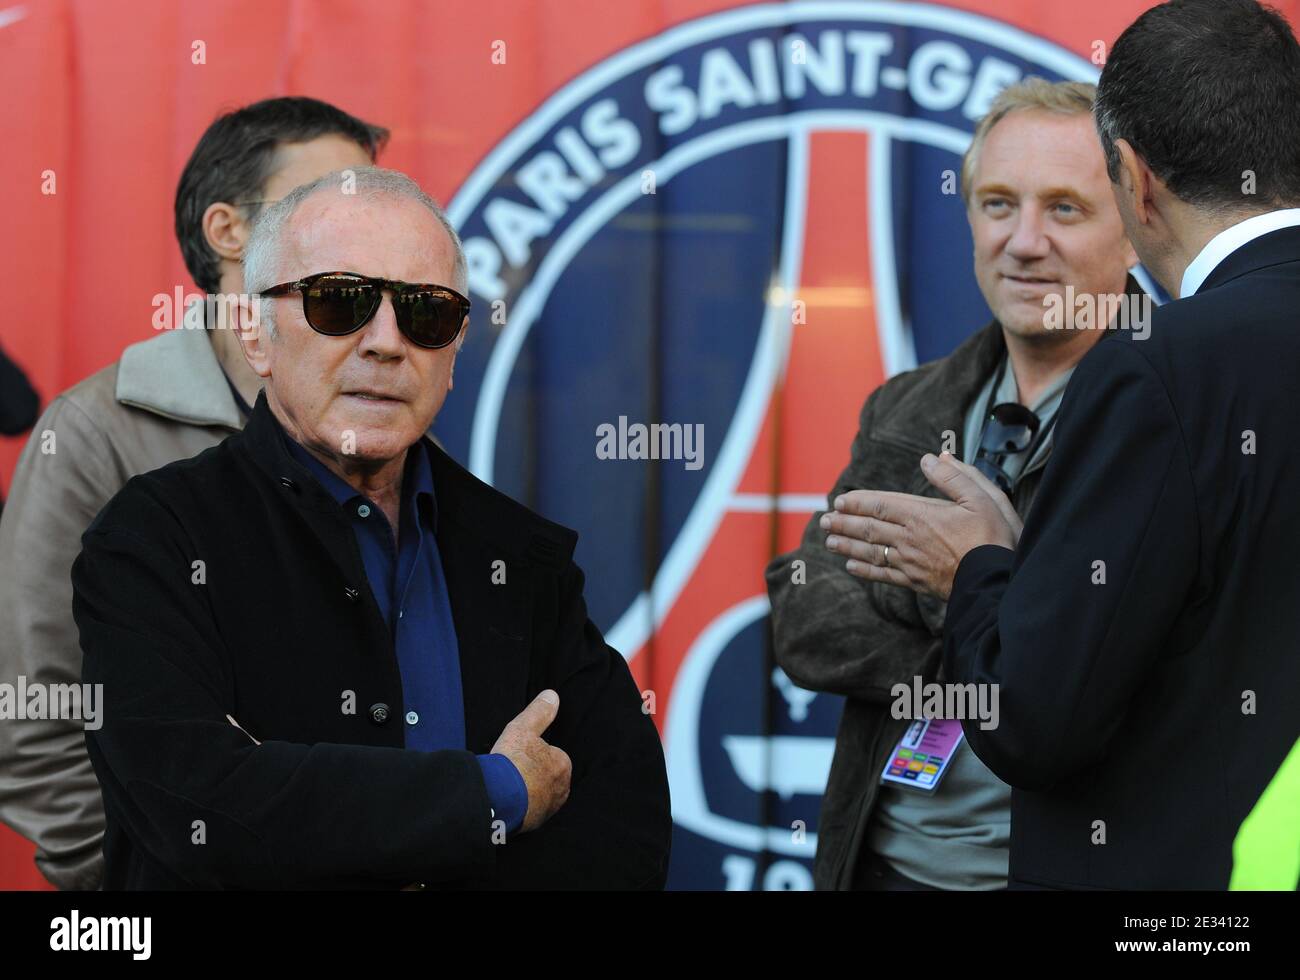 Rennes's owner Francois Pinault with son Francois-Henri Pinault during ...